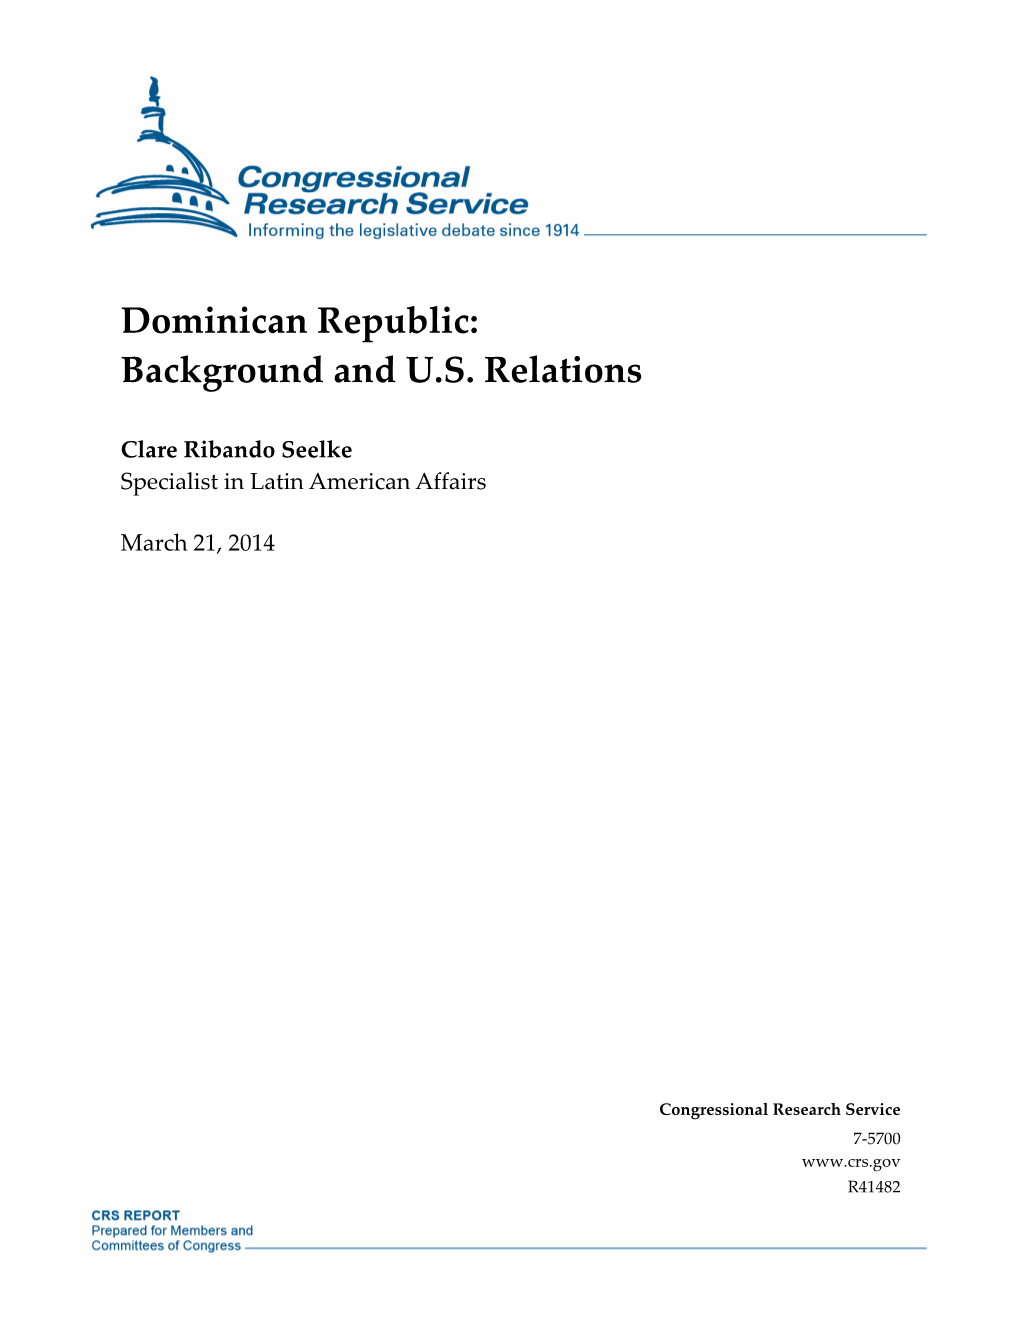 Dominican Republic: Background and U.S